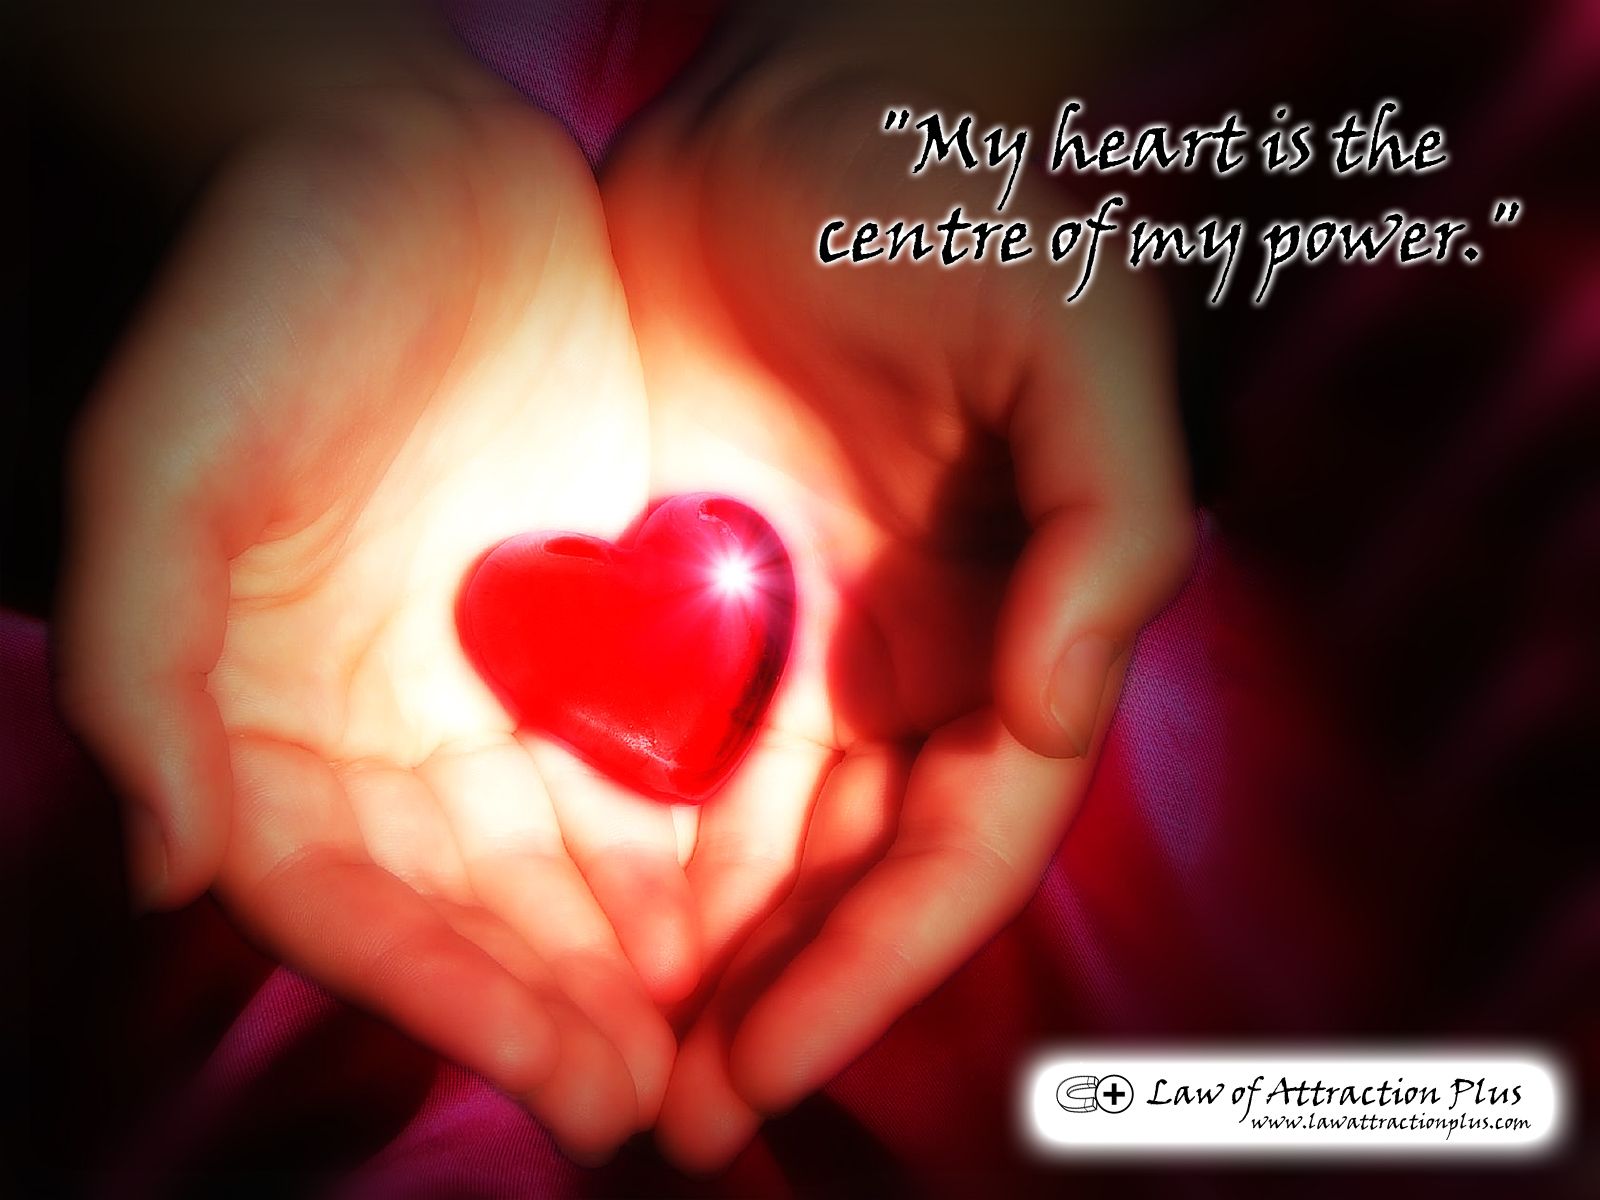 My heart is the centre of my power.